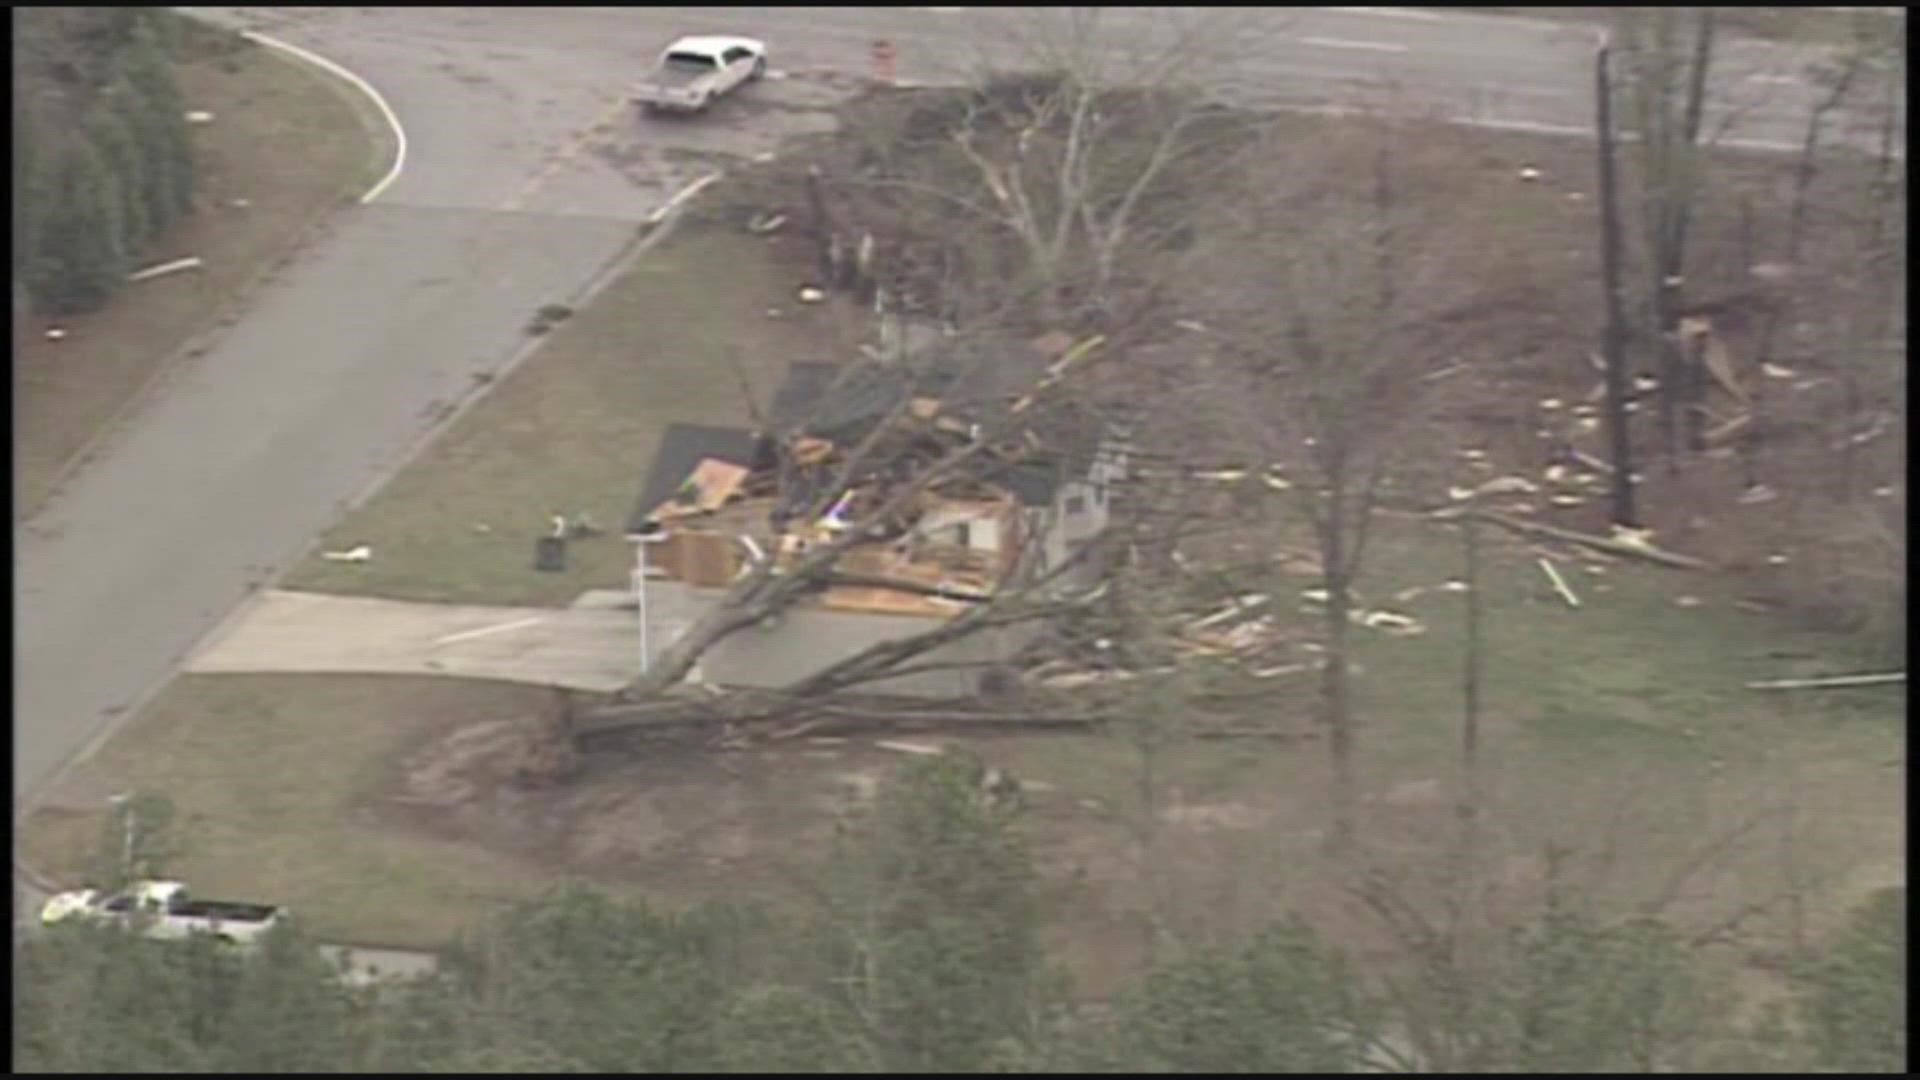 Raw damage in Paulding county after an EF-3 tornado hit on March 2, 2012